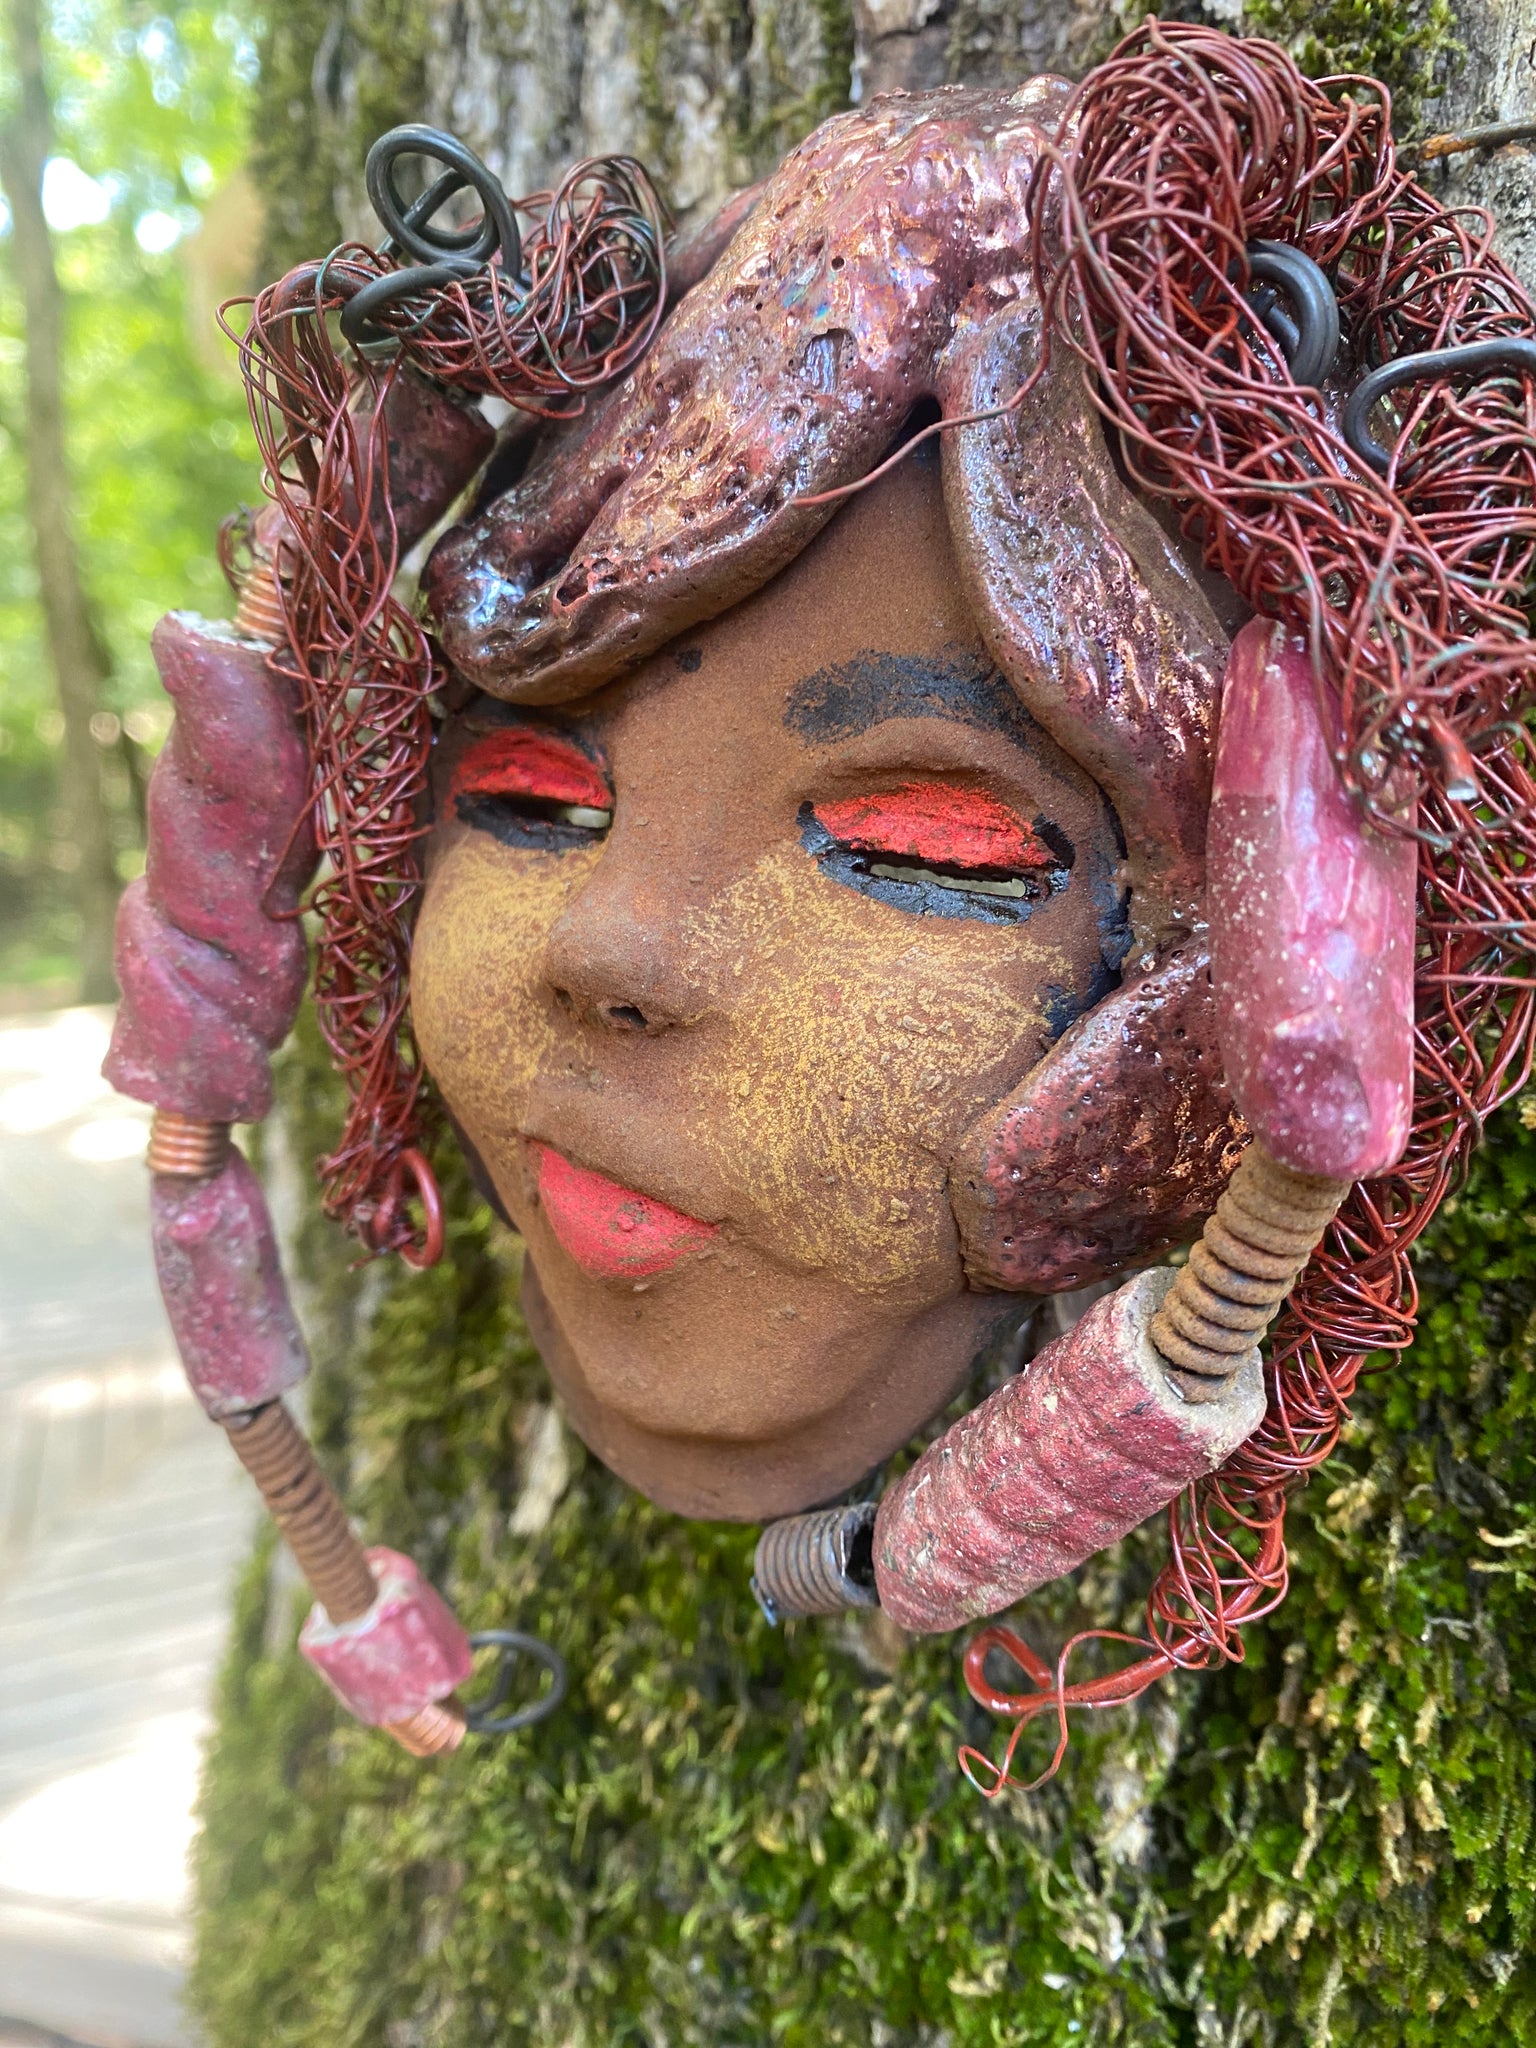 Valiza boasts an eye-catching rust brown complexion complete with rust  red lips.  At 7" x 5" and 10 ozs. she is crafted with 5 handmade, raku-fired beads. Additionally, Valiza features over 15 feet of coiled 24 and 16 gauge wire hair. If you have questions, please reach out!  